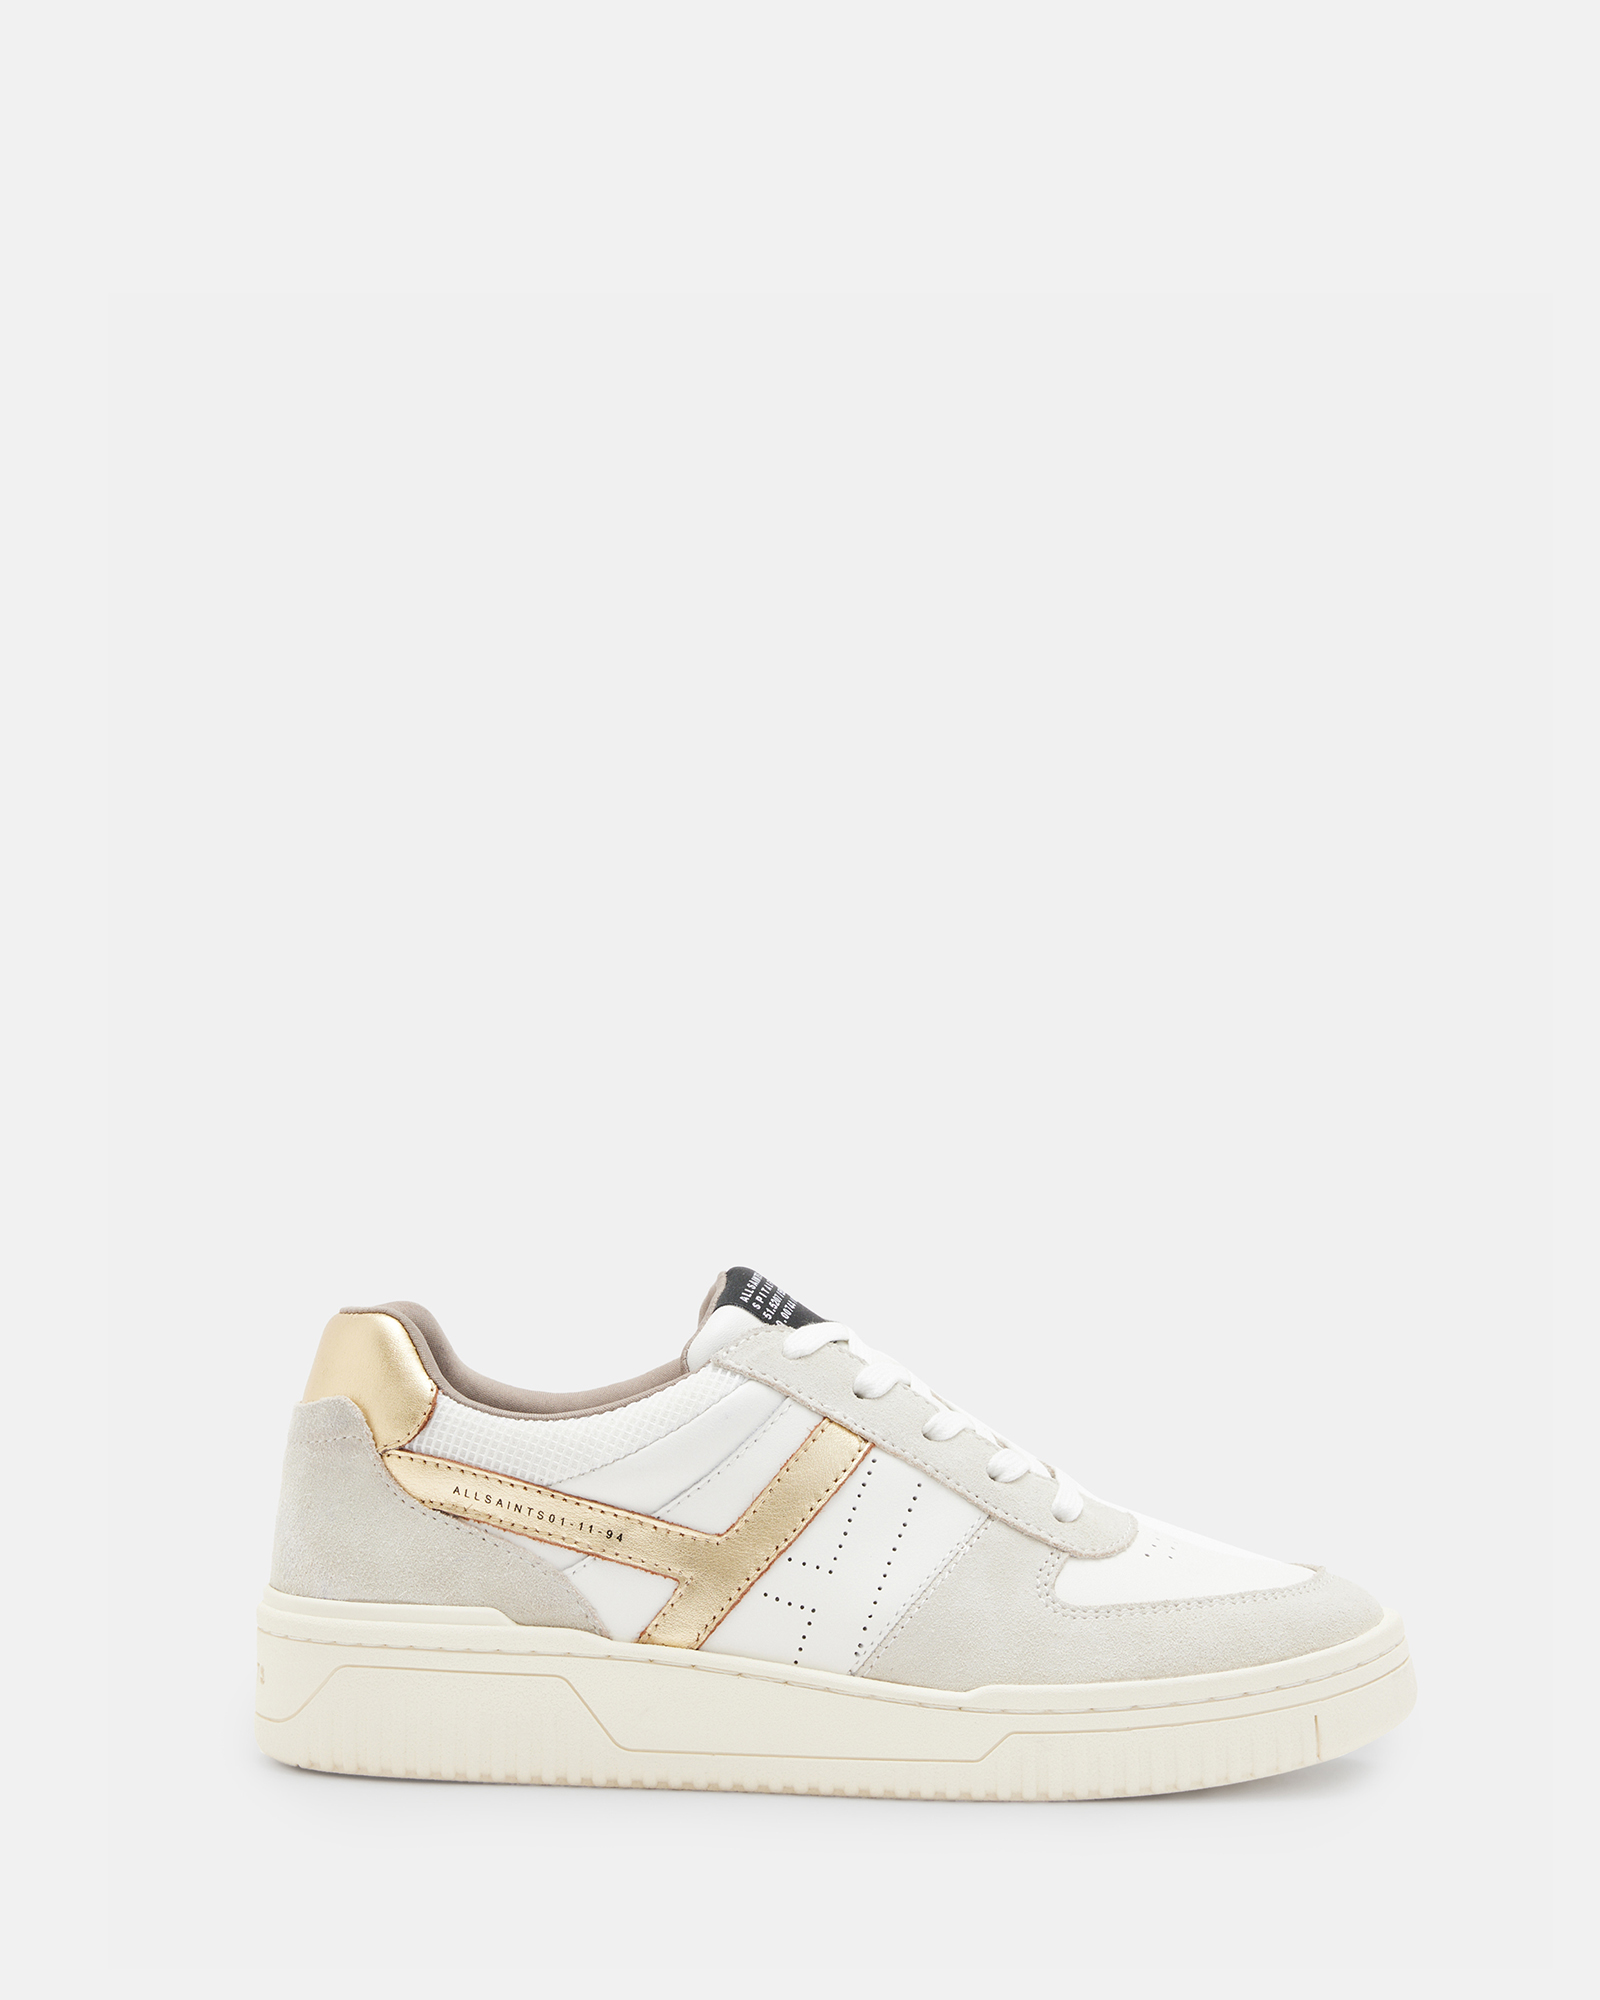 AllSaints Vix Low Top Round Toe Suede Trainers,, White/gold